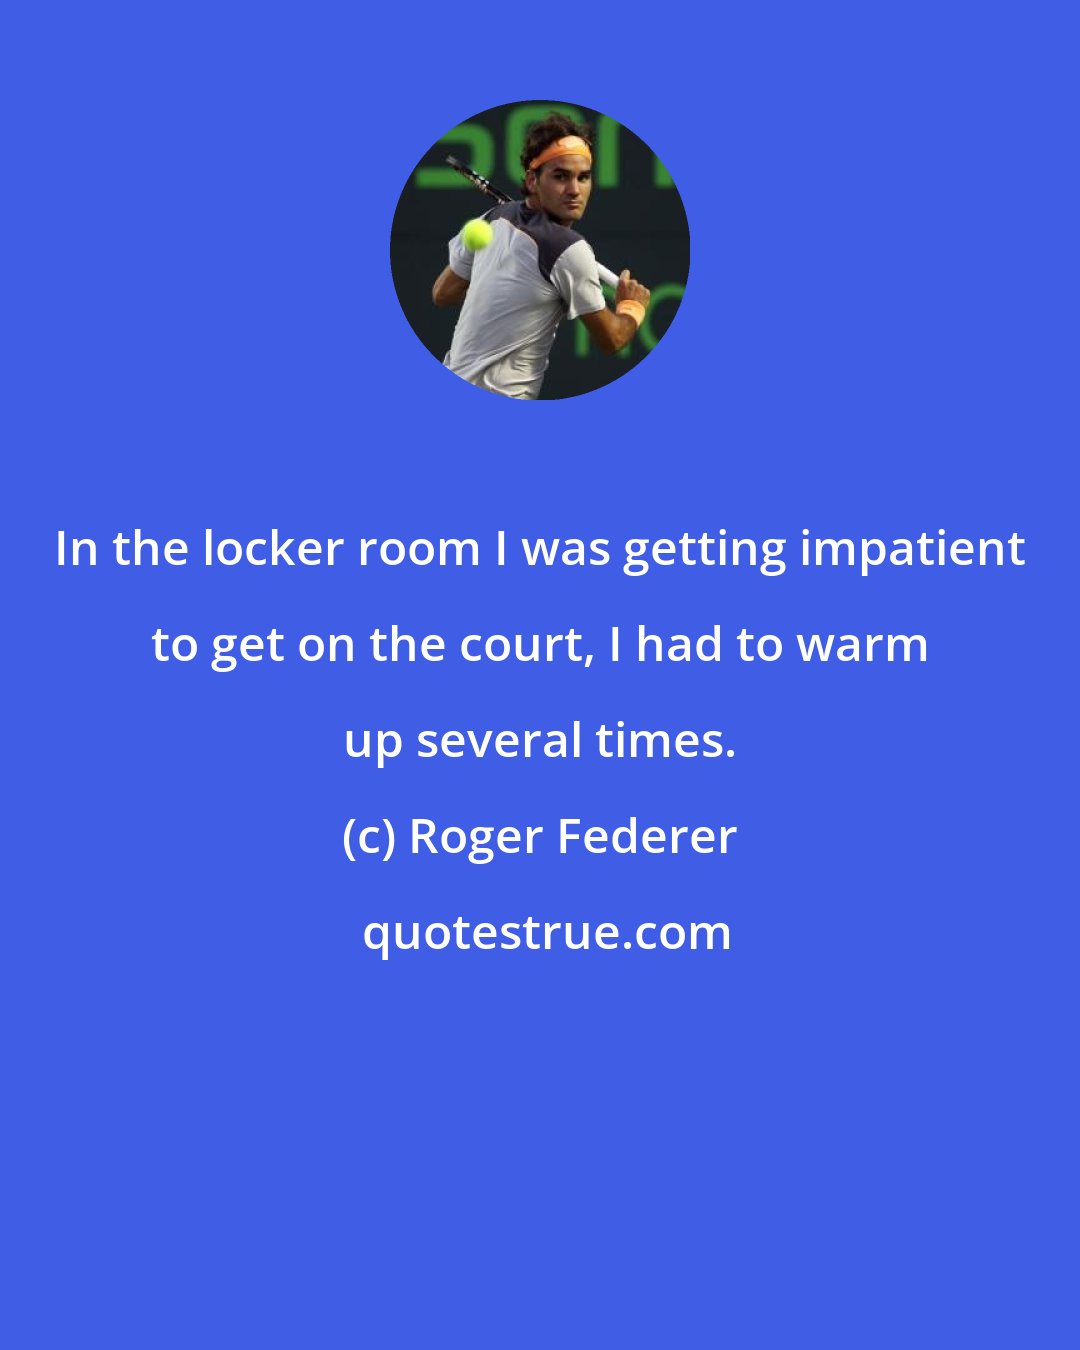 Roger Federer: In the locker room I was getting impatient to get on the court, I had to warm up several times.